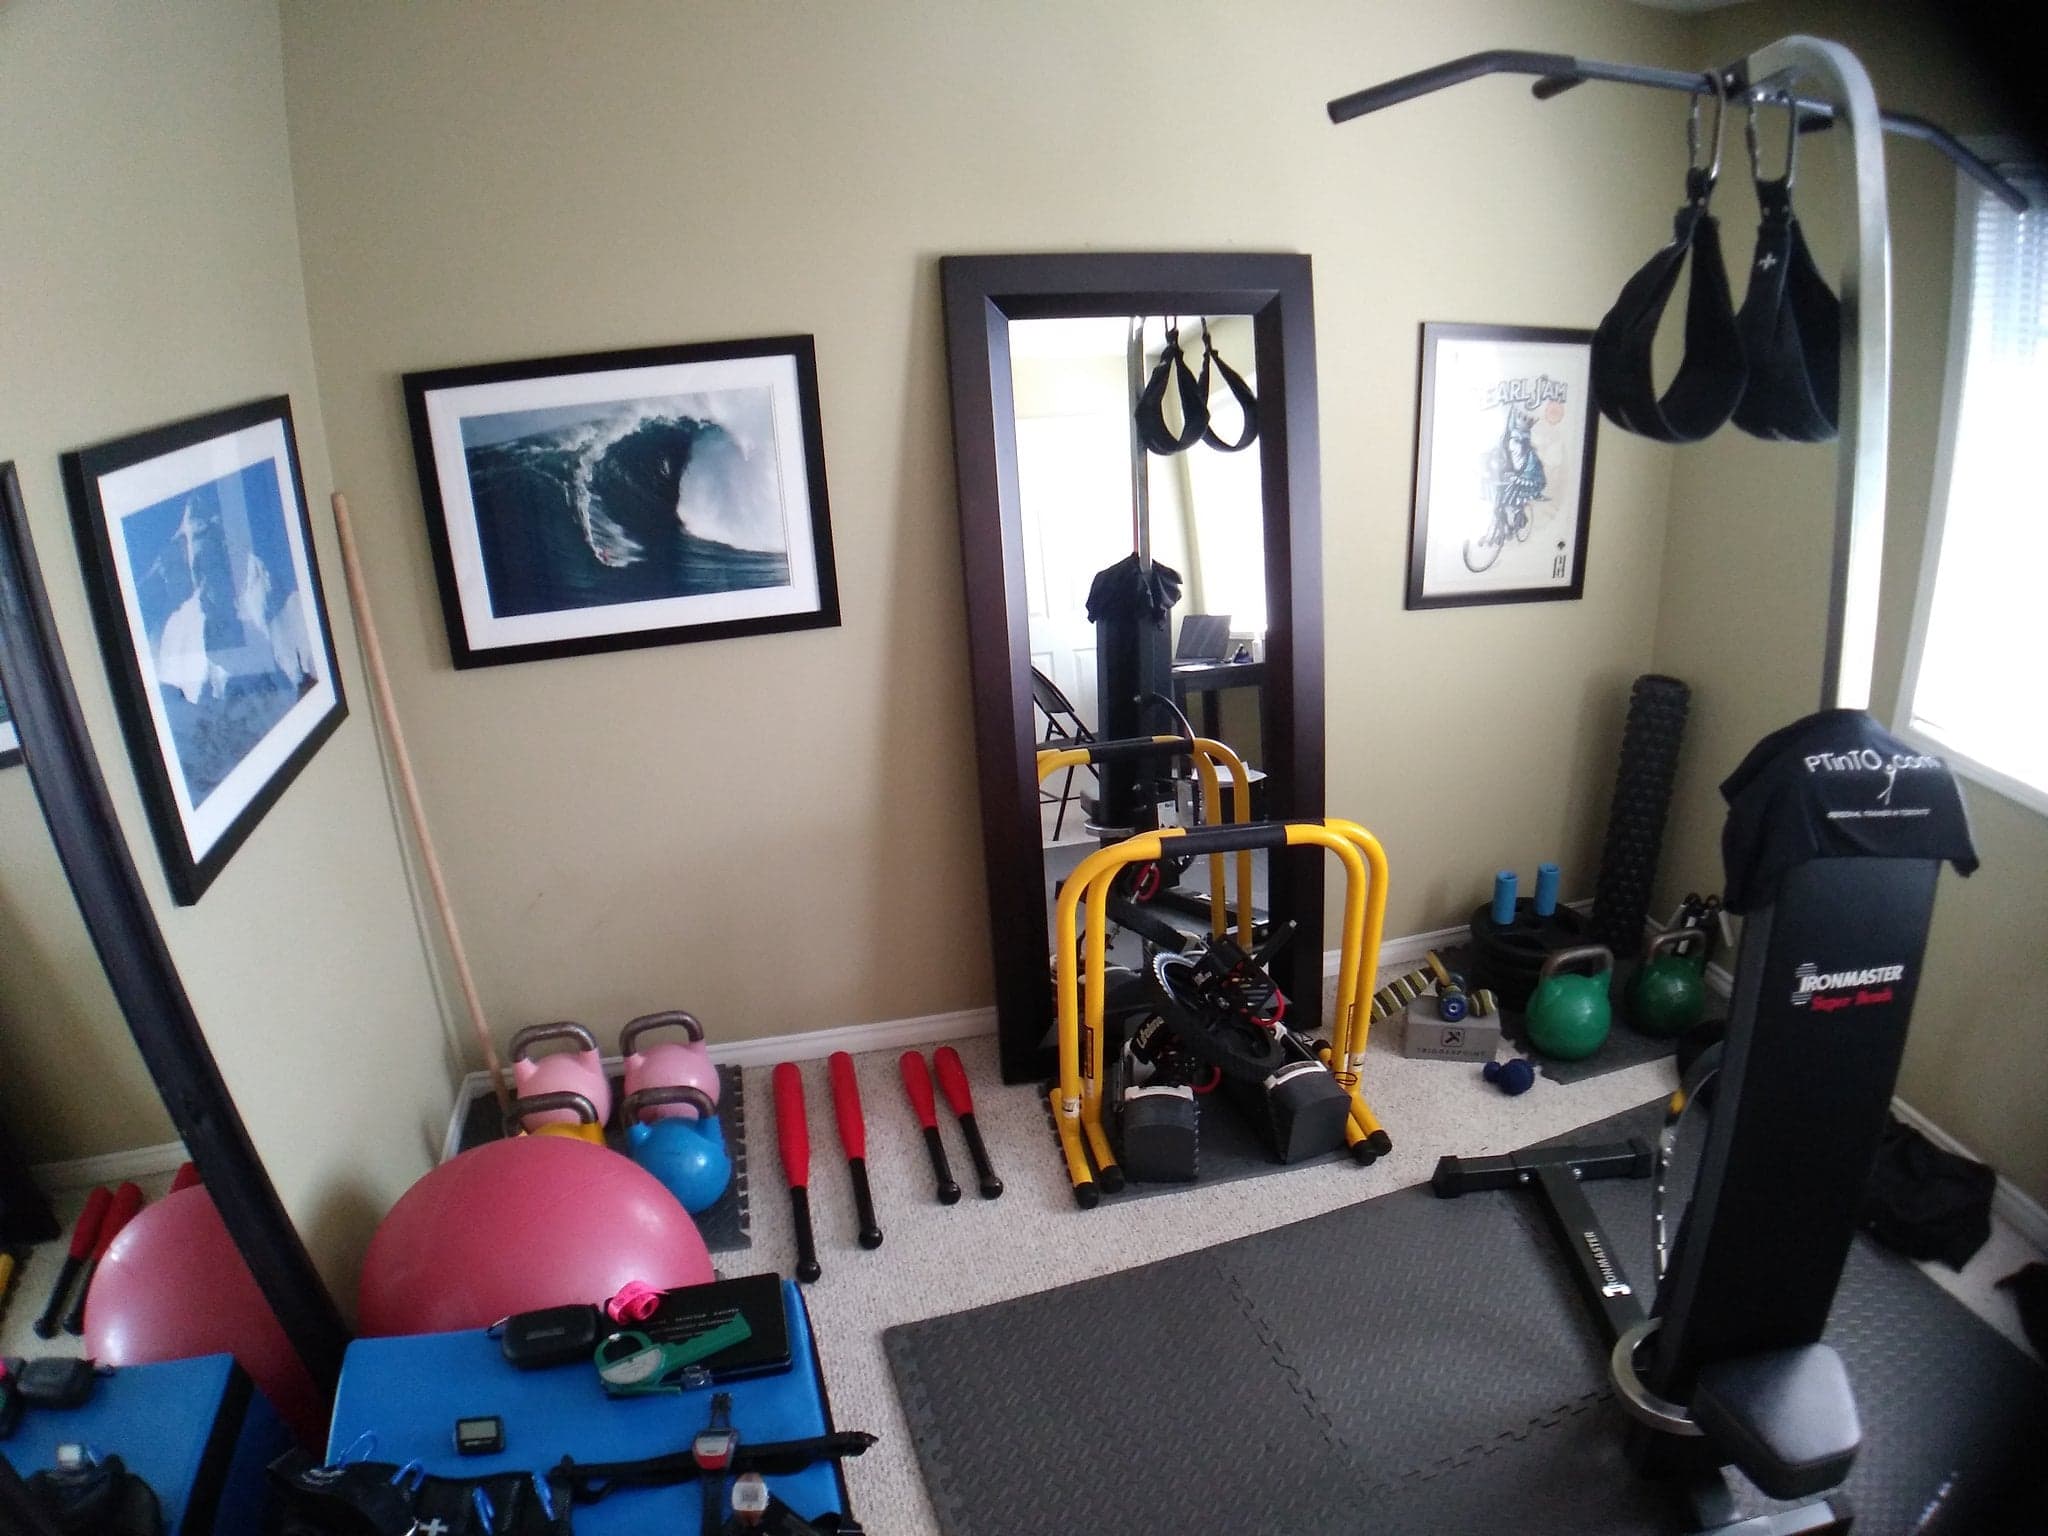 treadmill and workout equipment in room